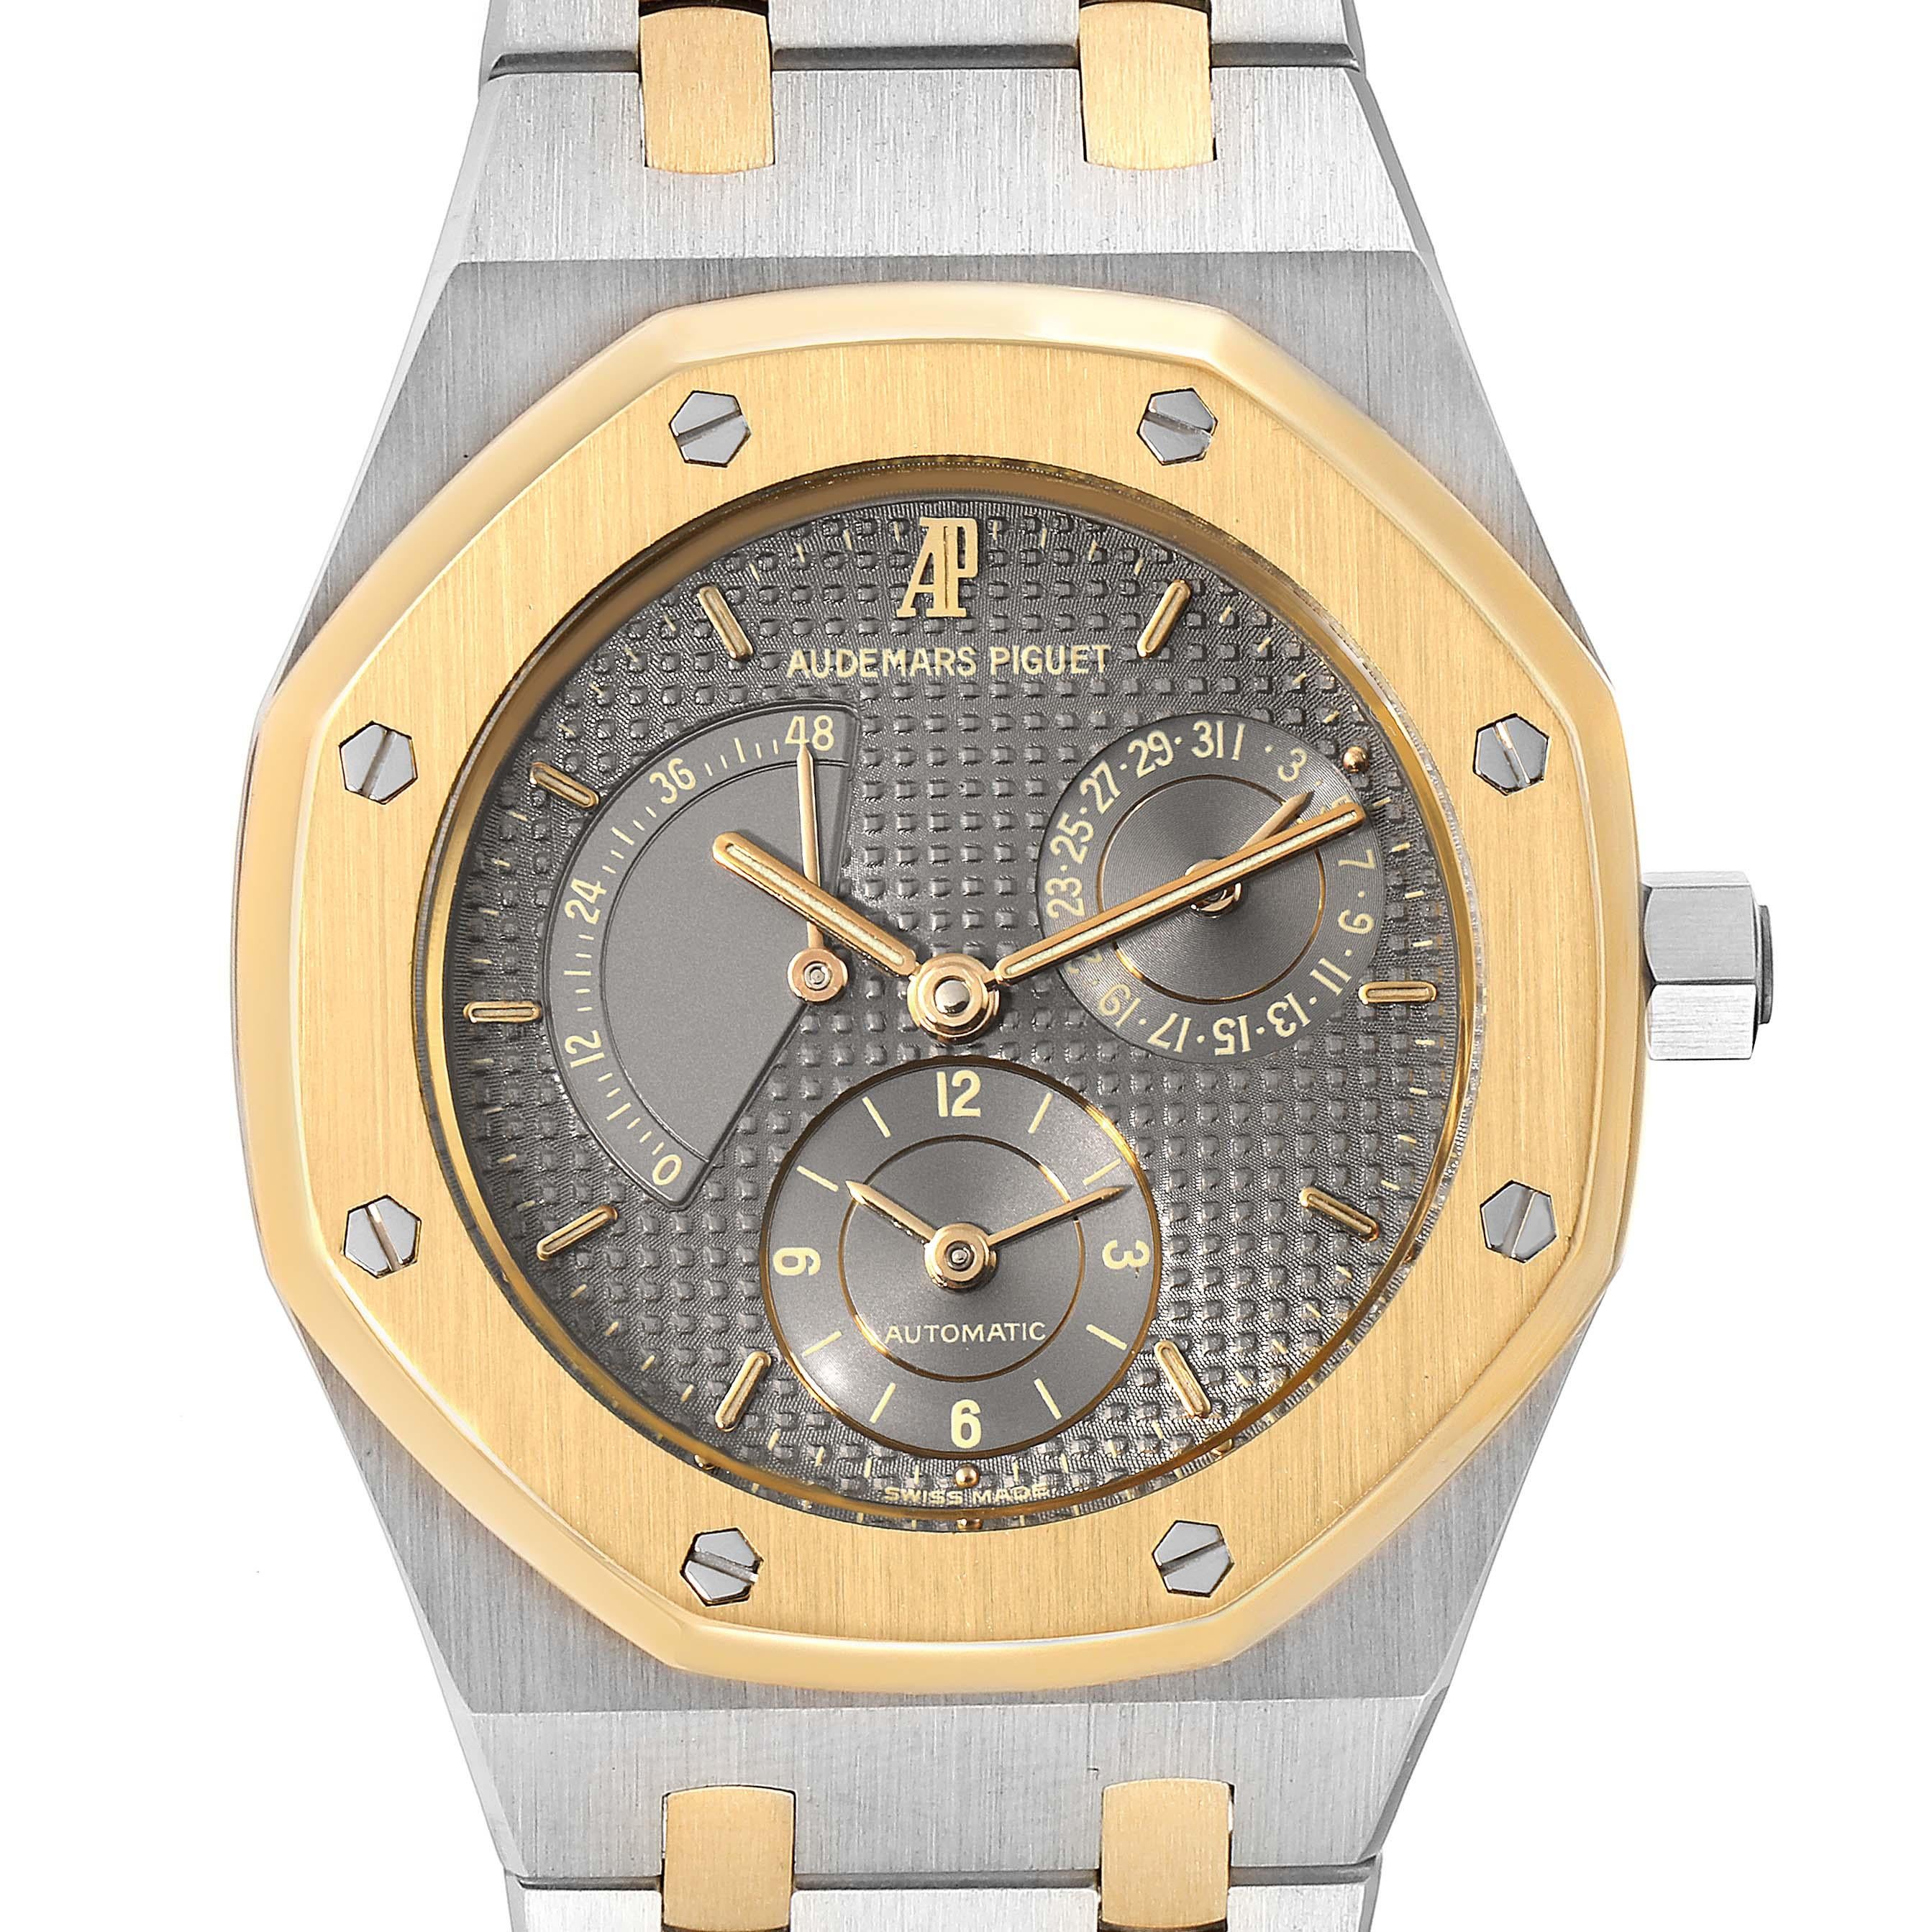 Audemars Piguet Royal Oak Steel Yellow Gold Mens Watch 25730 Service papers. Automatic self-winding movement. Brushed stainless steel and 18K yellow gold case 36.0 mm in diameter. 18K yellow gold bezel punctuated with 8 signature screws. Scratch